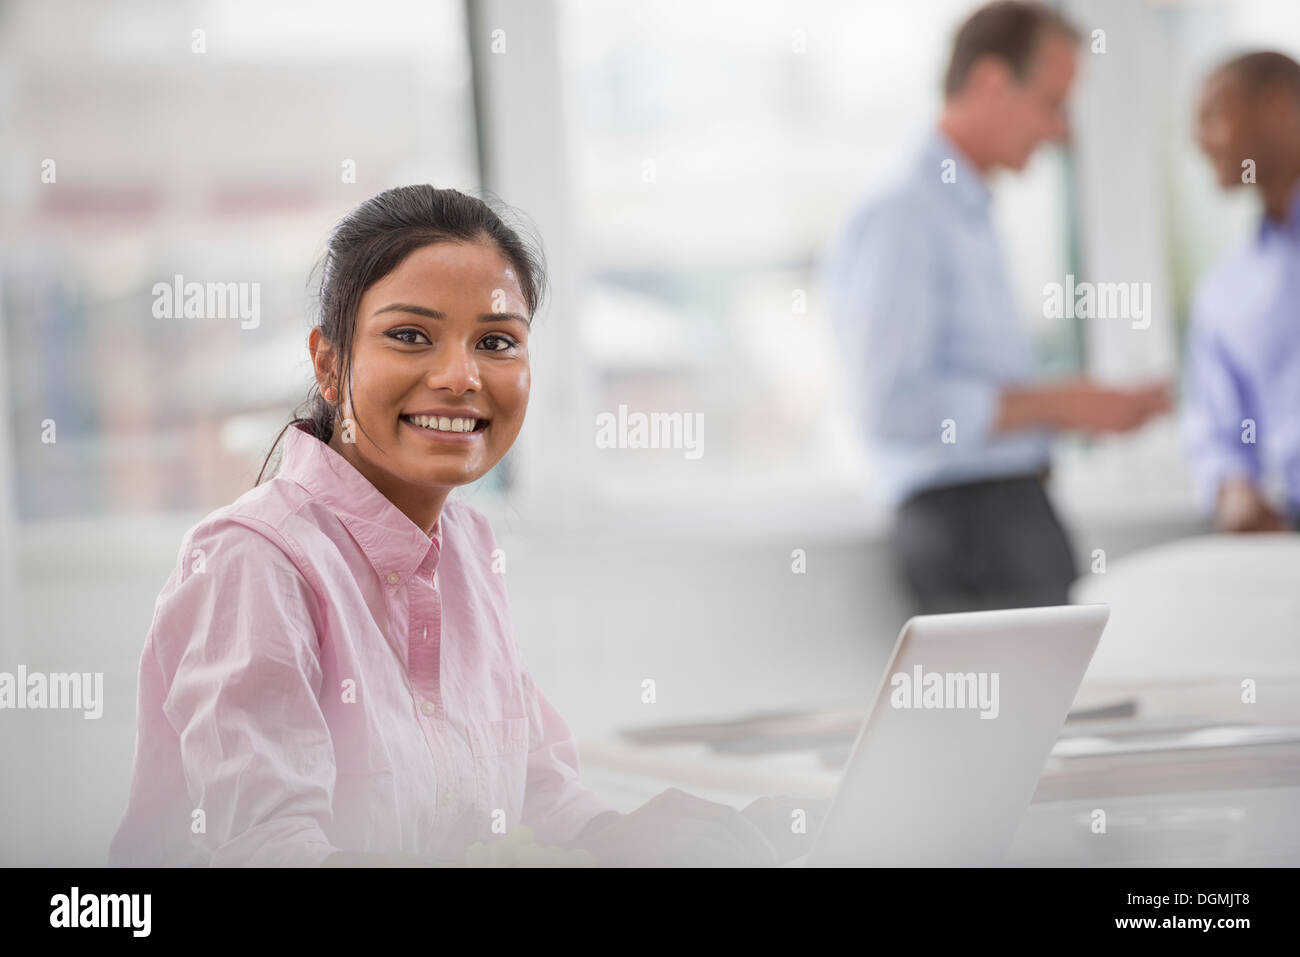 Office life. A woman sitting at a desk using a laptop computer. Two men in the background. Stock Photo